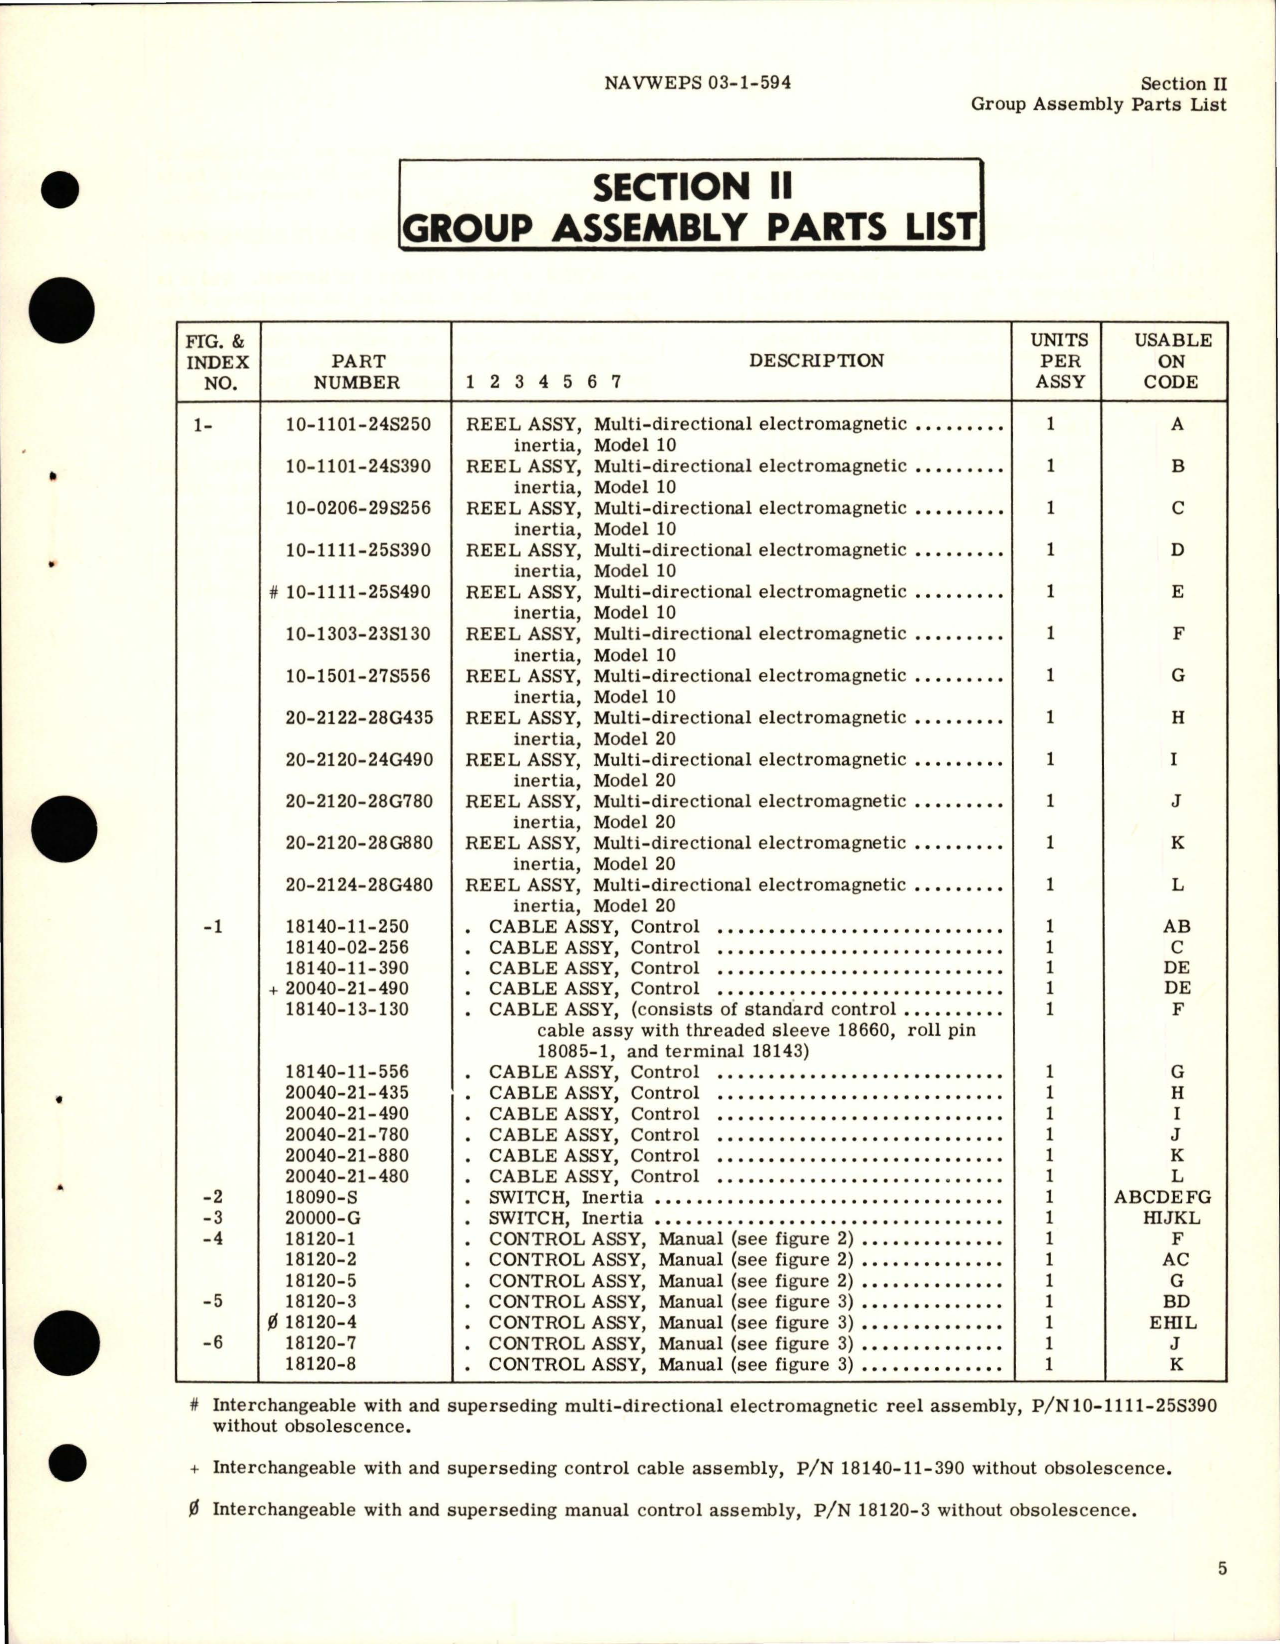 Sample page 7 from AirCorps Library document: Illustrated Parts Breakdown for Multi-Directional Electromagnetic Inertia Reel Assembly - Model 10 and Model 20